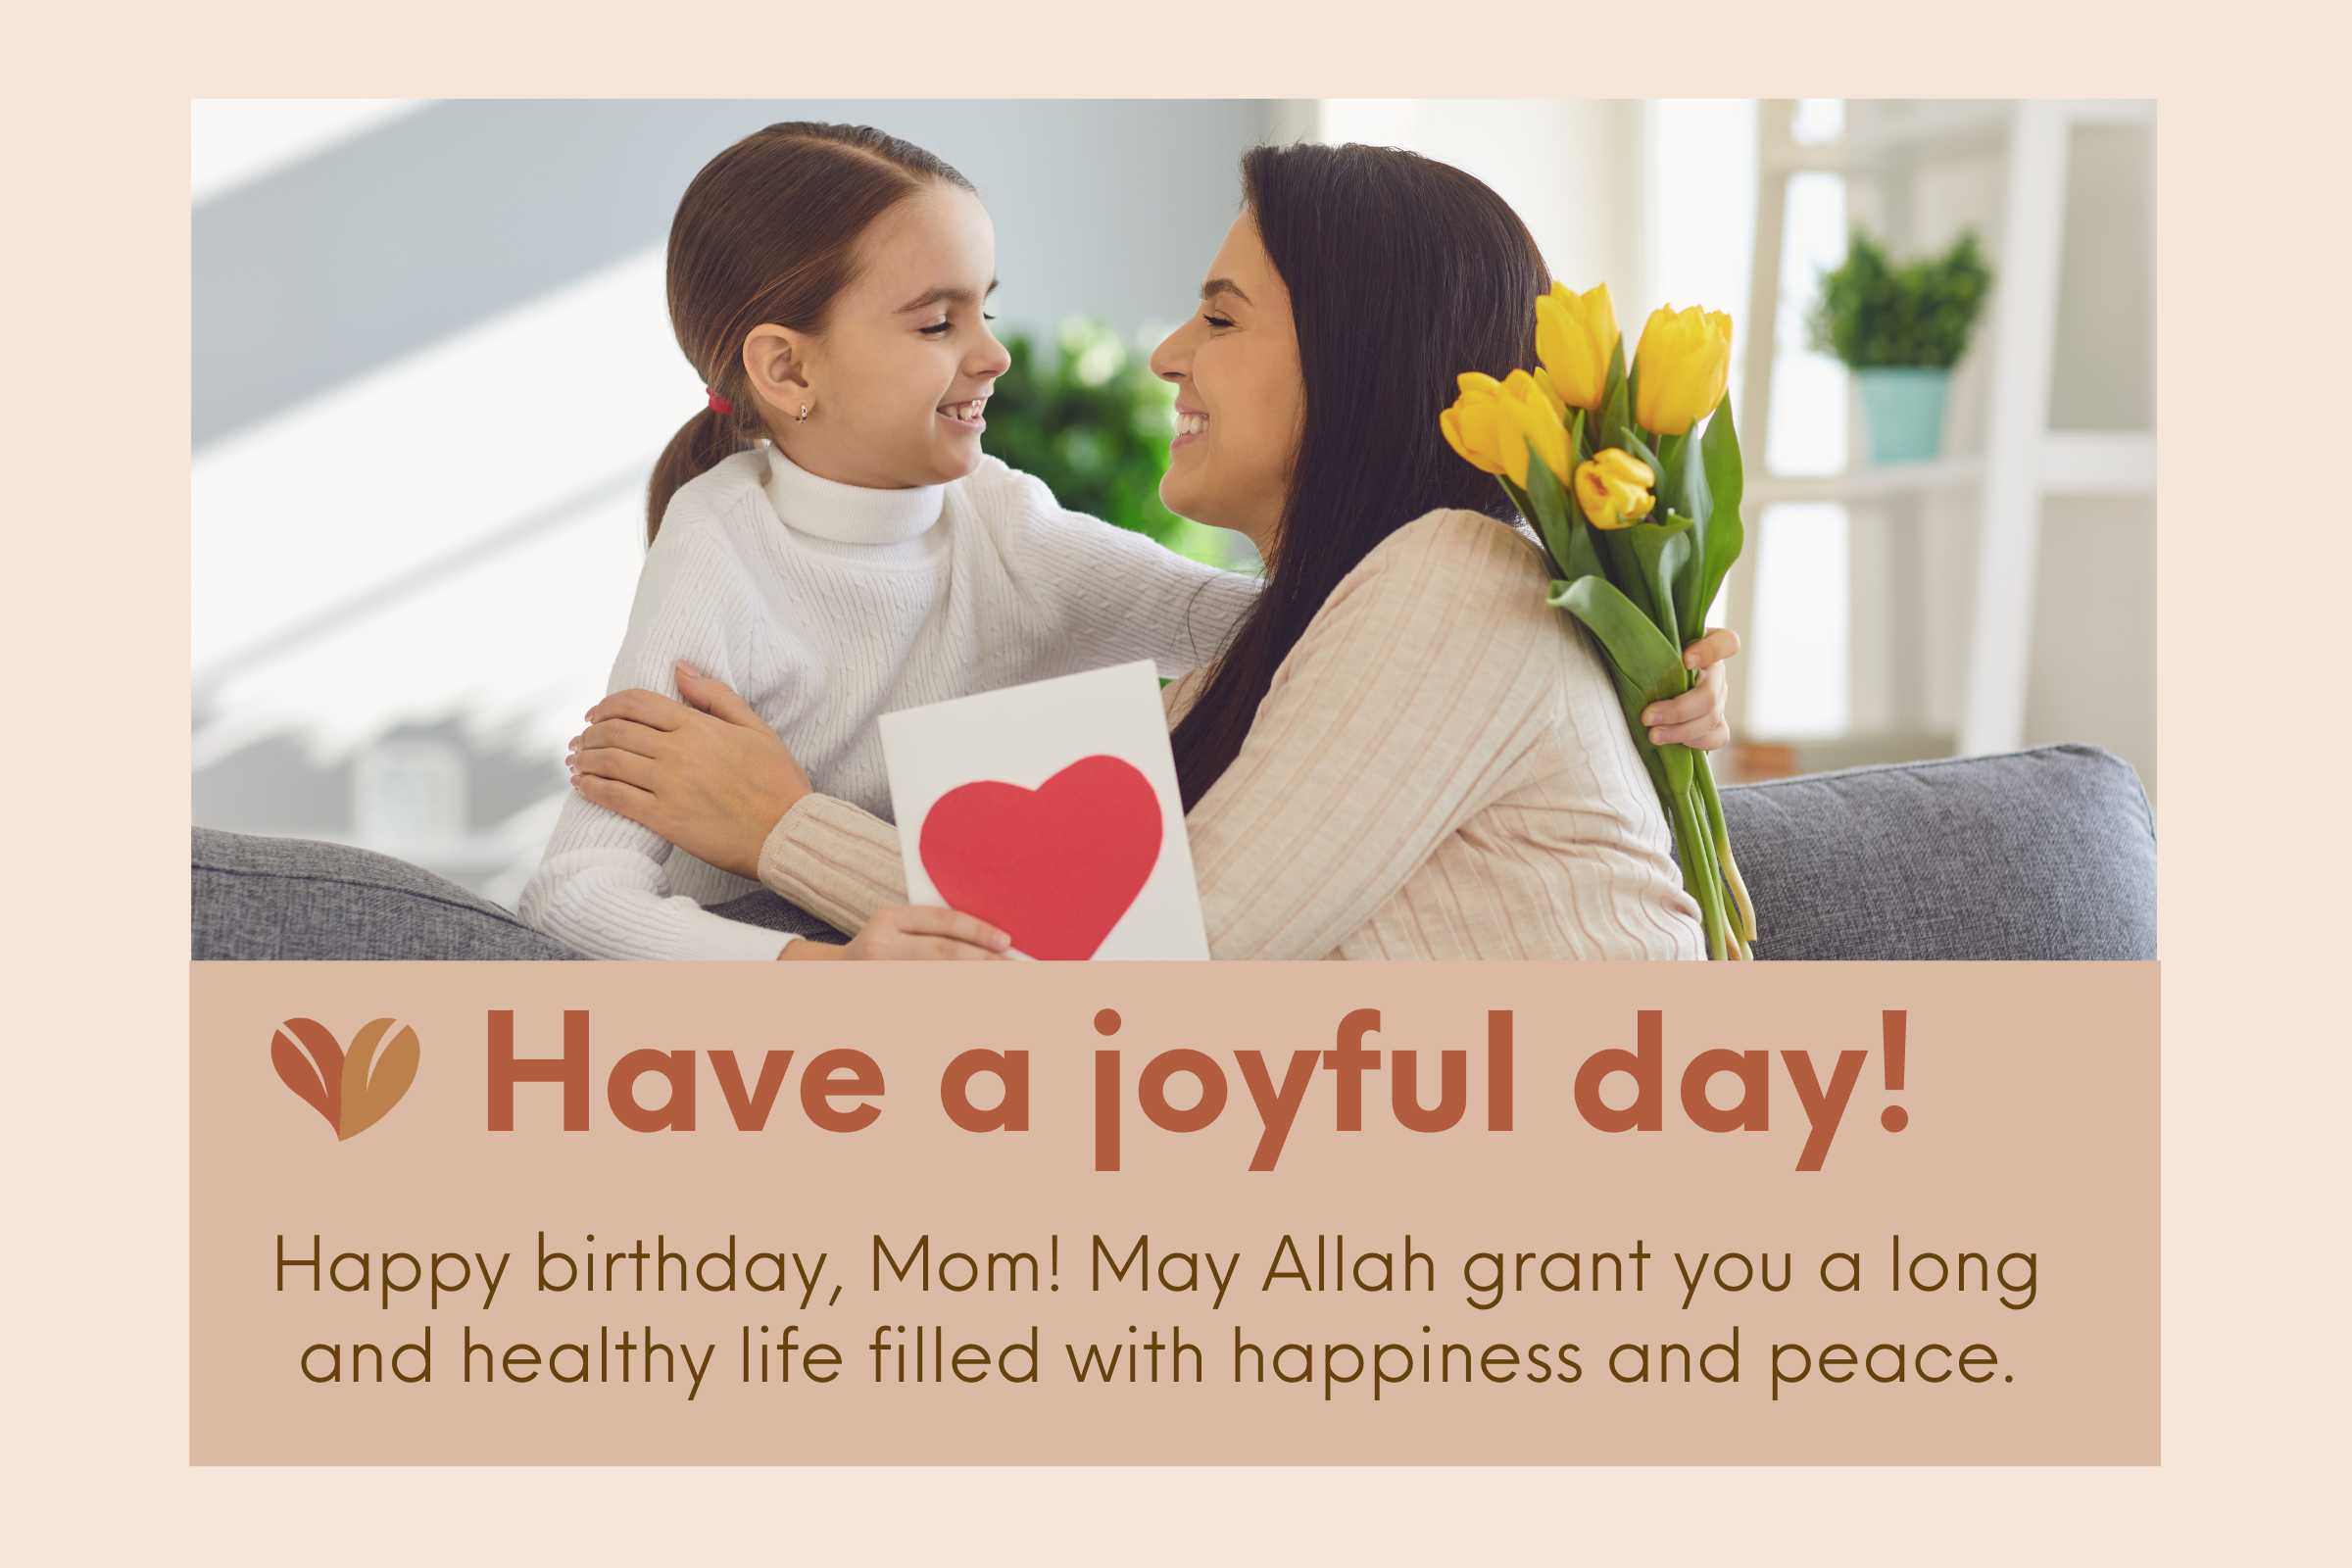 May Allah bless you with good health and happiness